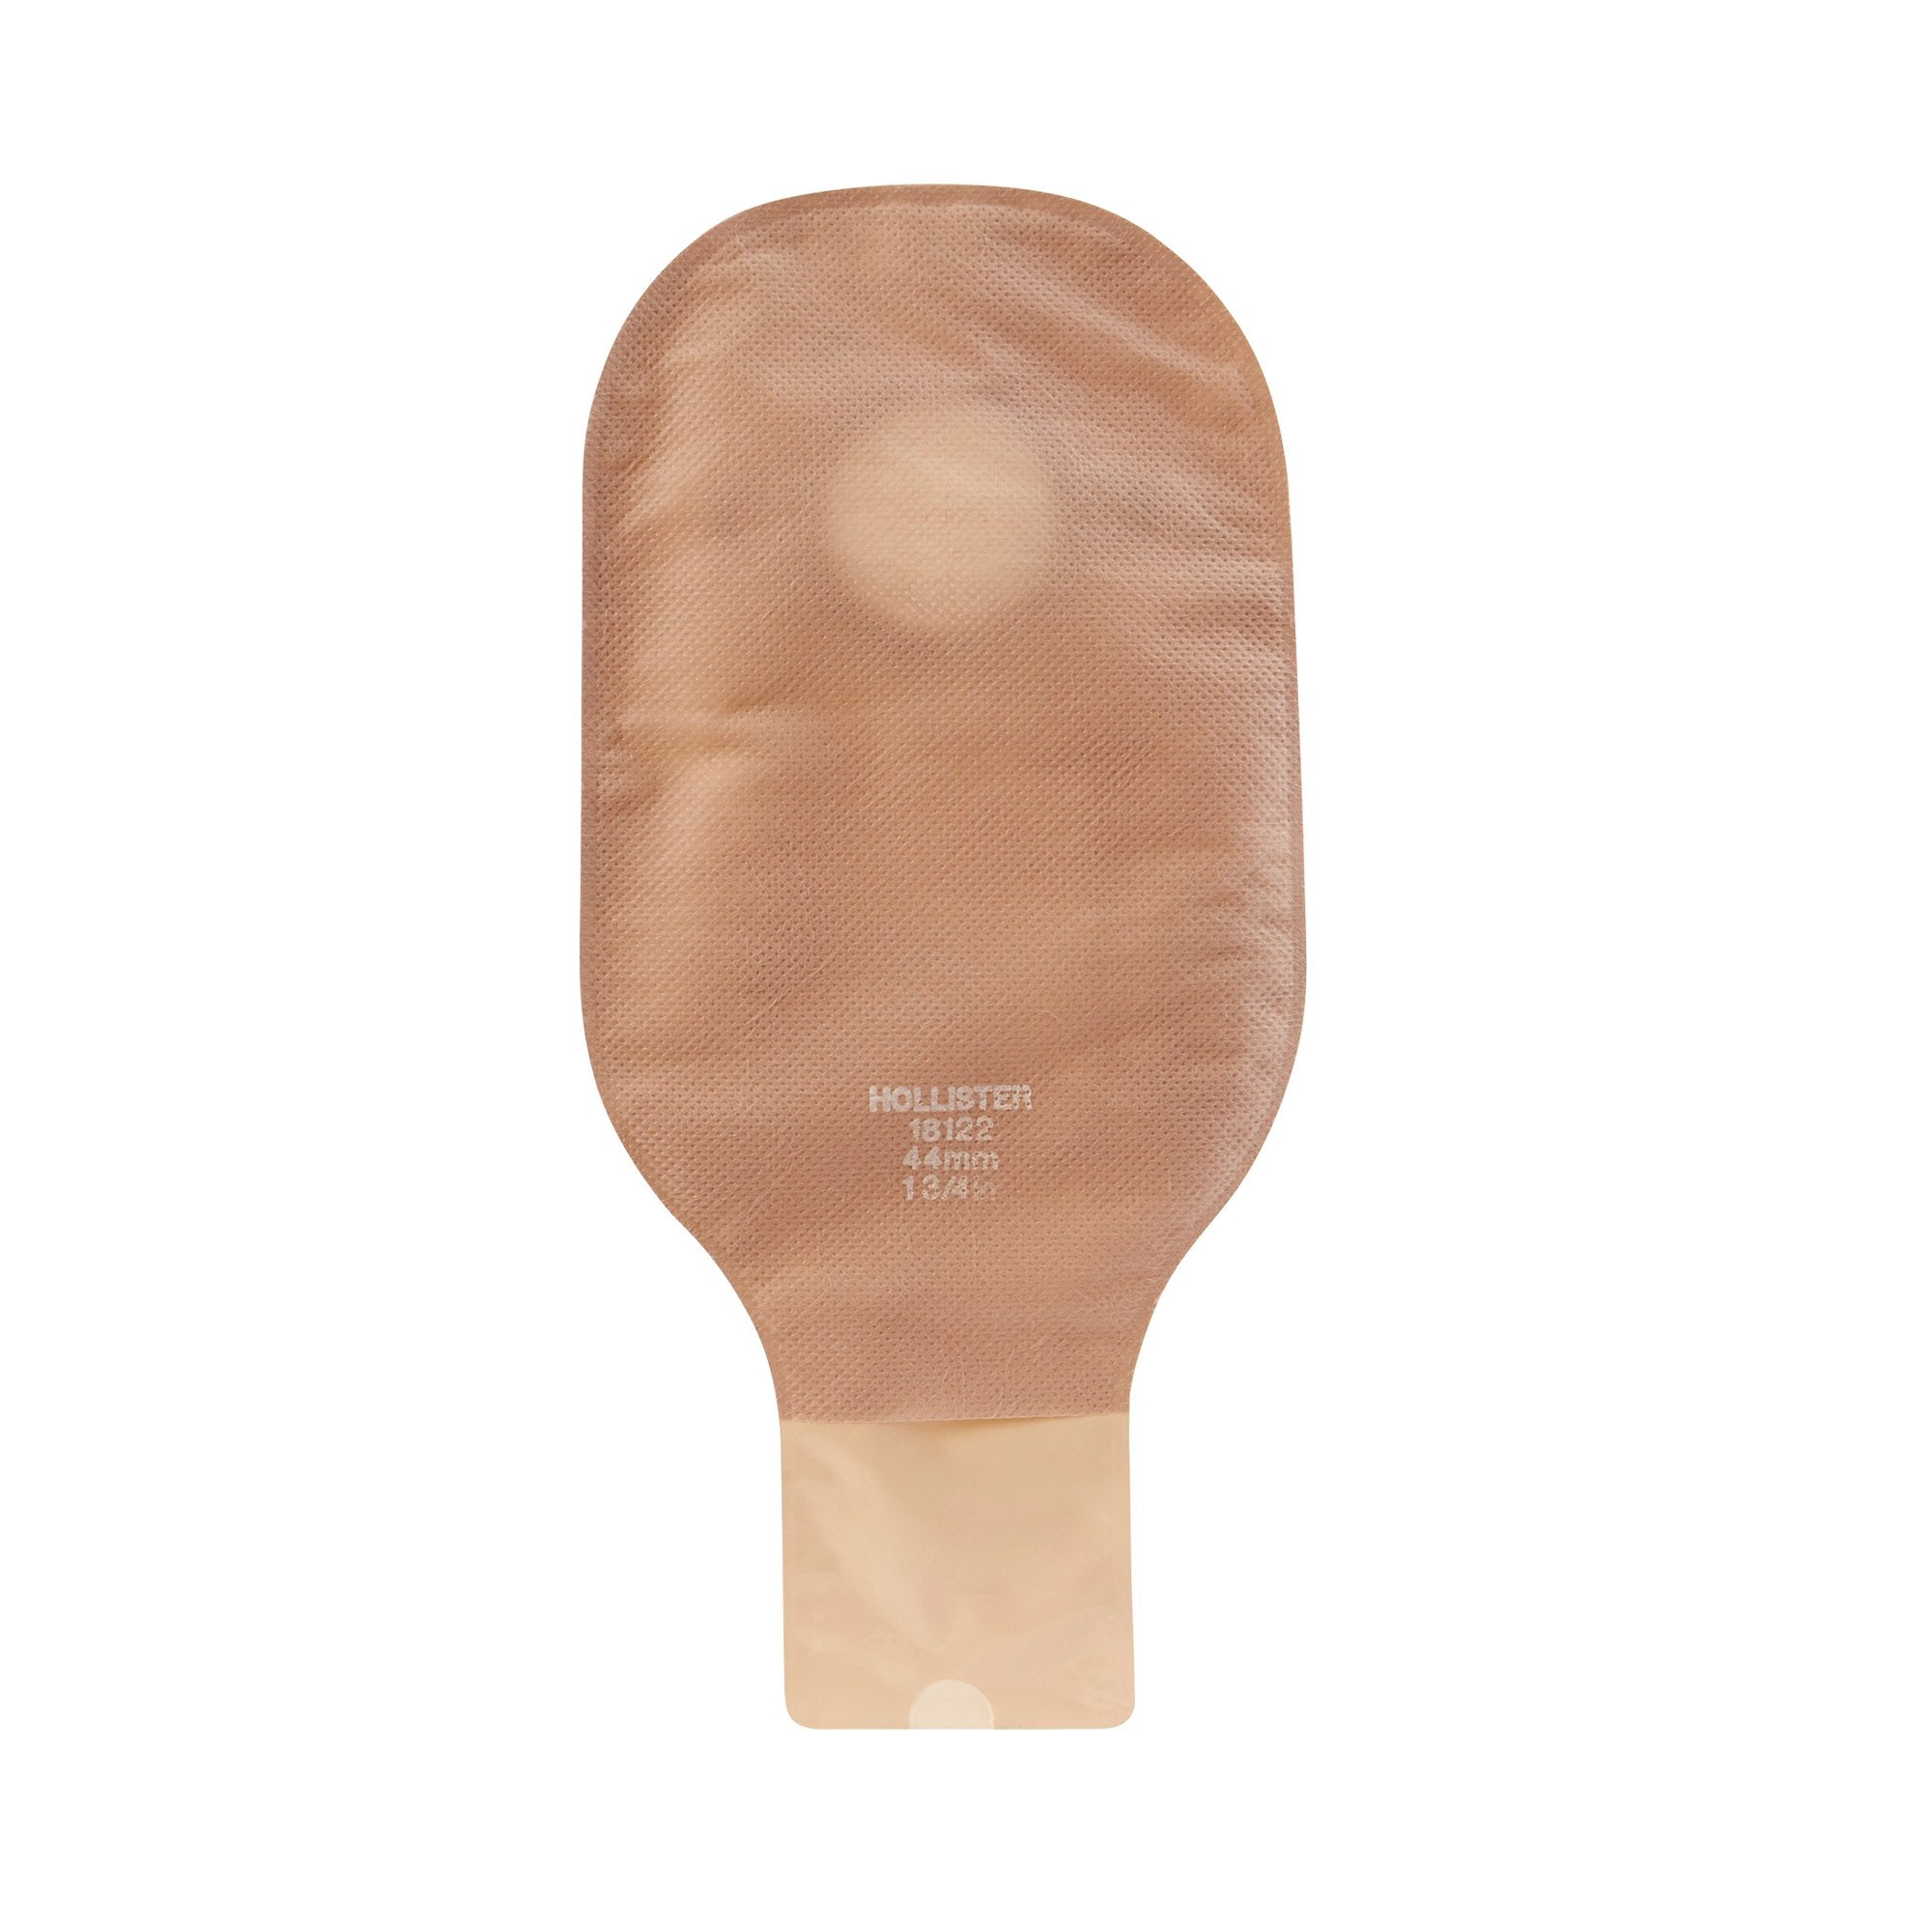 Colostomy Pouch New Image 12 Inch Length Drainable